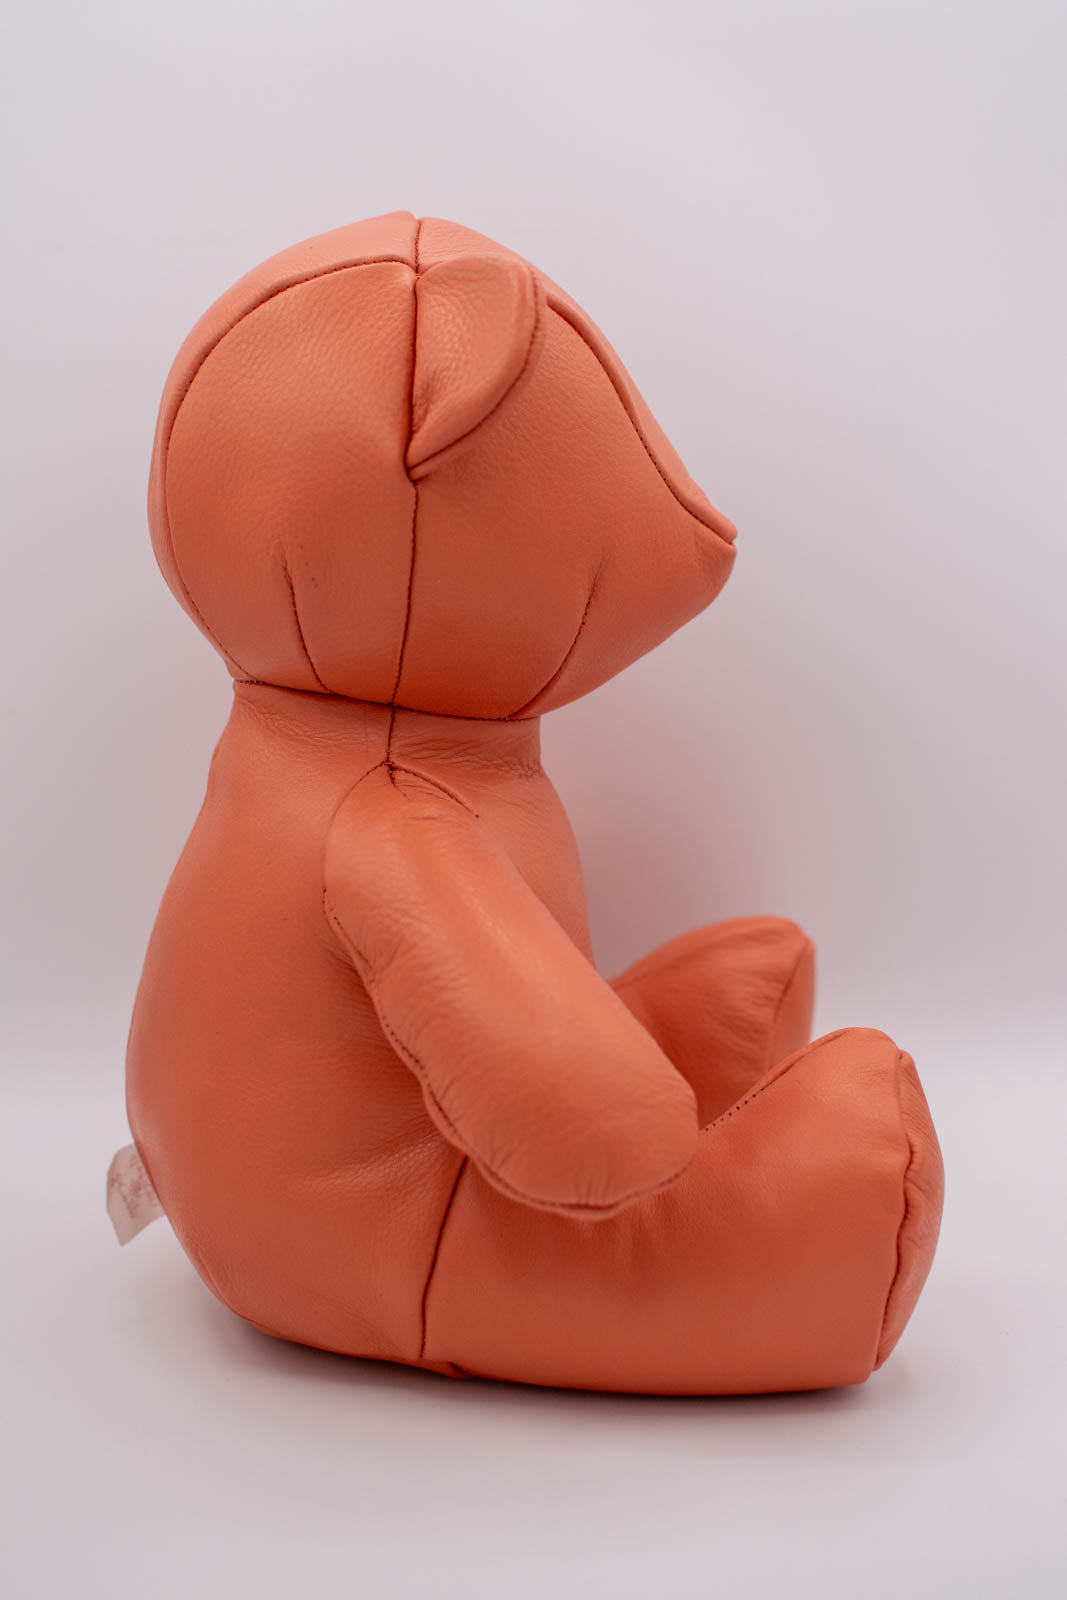 Eco-Friendly Salmon Leather Teddy Bear Without Eyes #0801002